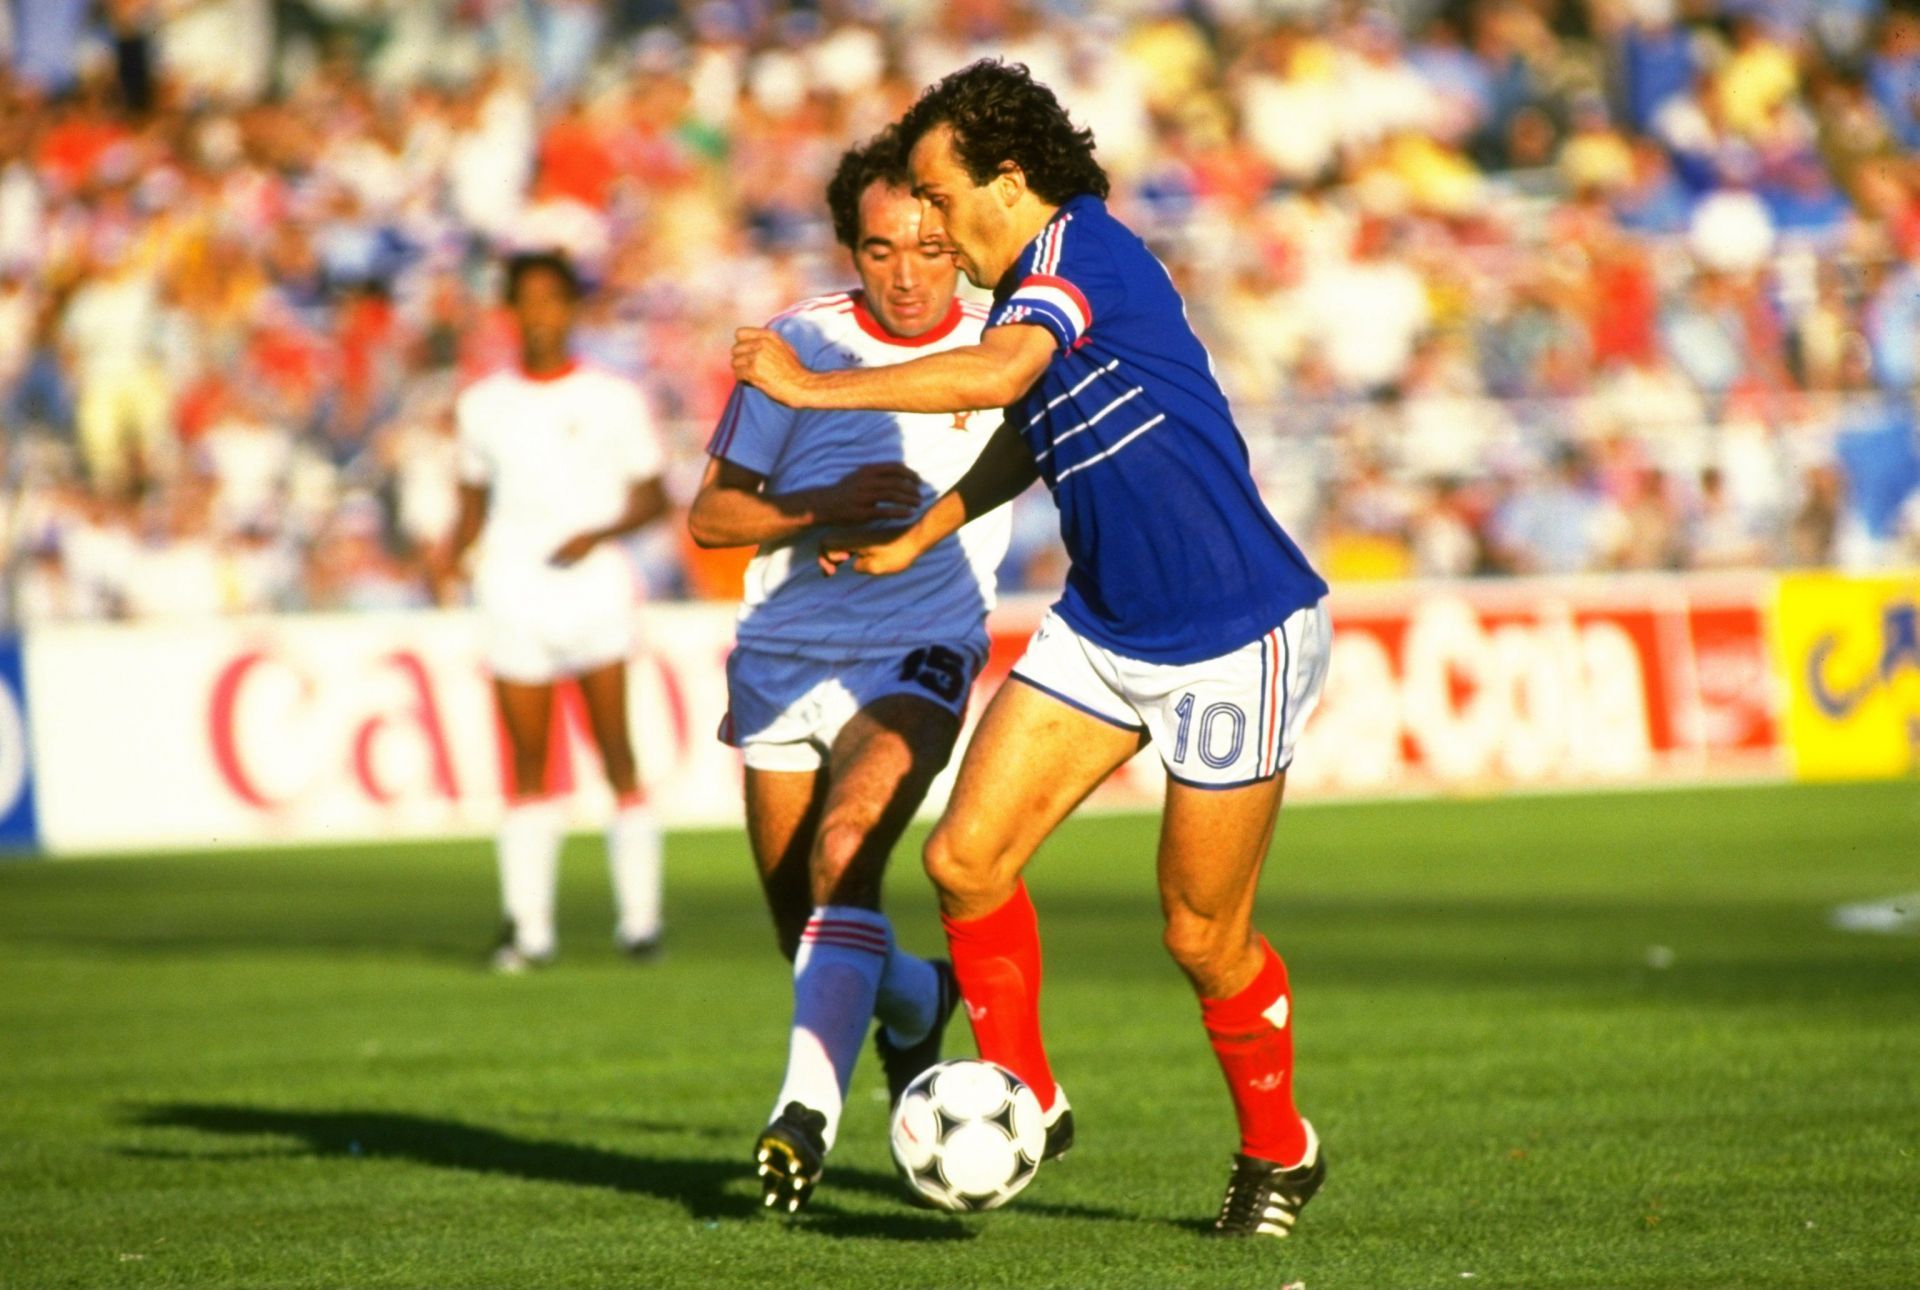 French football legend Michel Platini (#10) led his country to their first international tournament win in 1984.